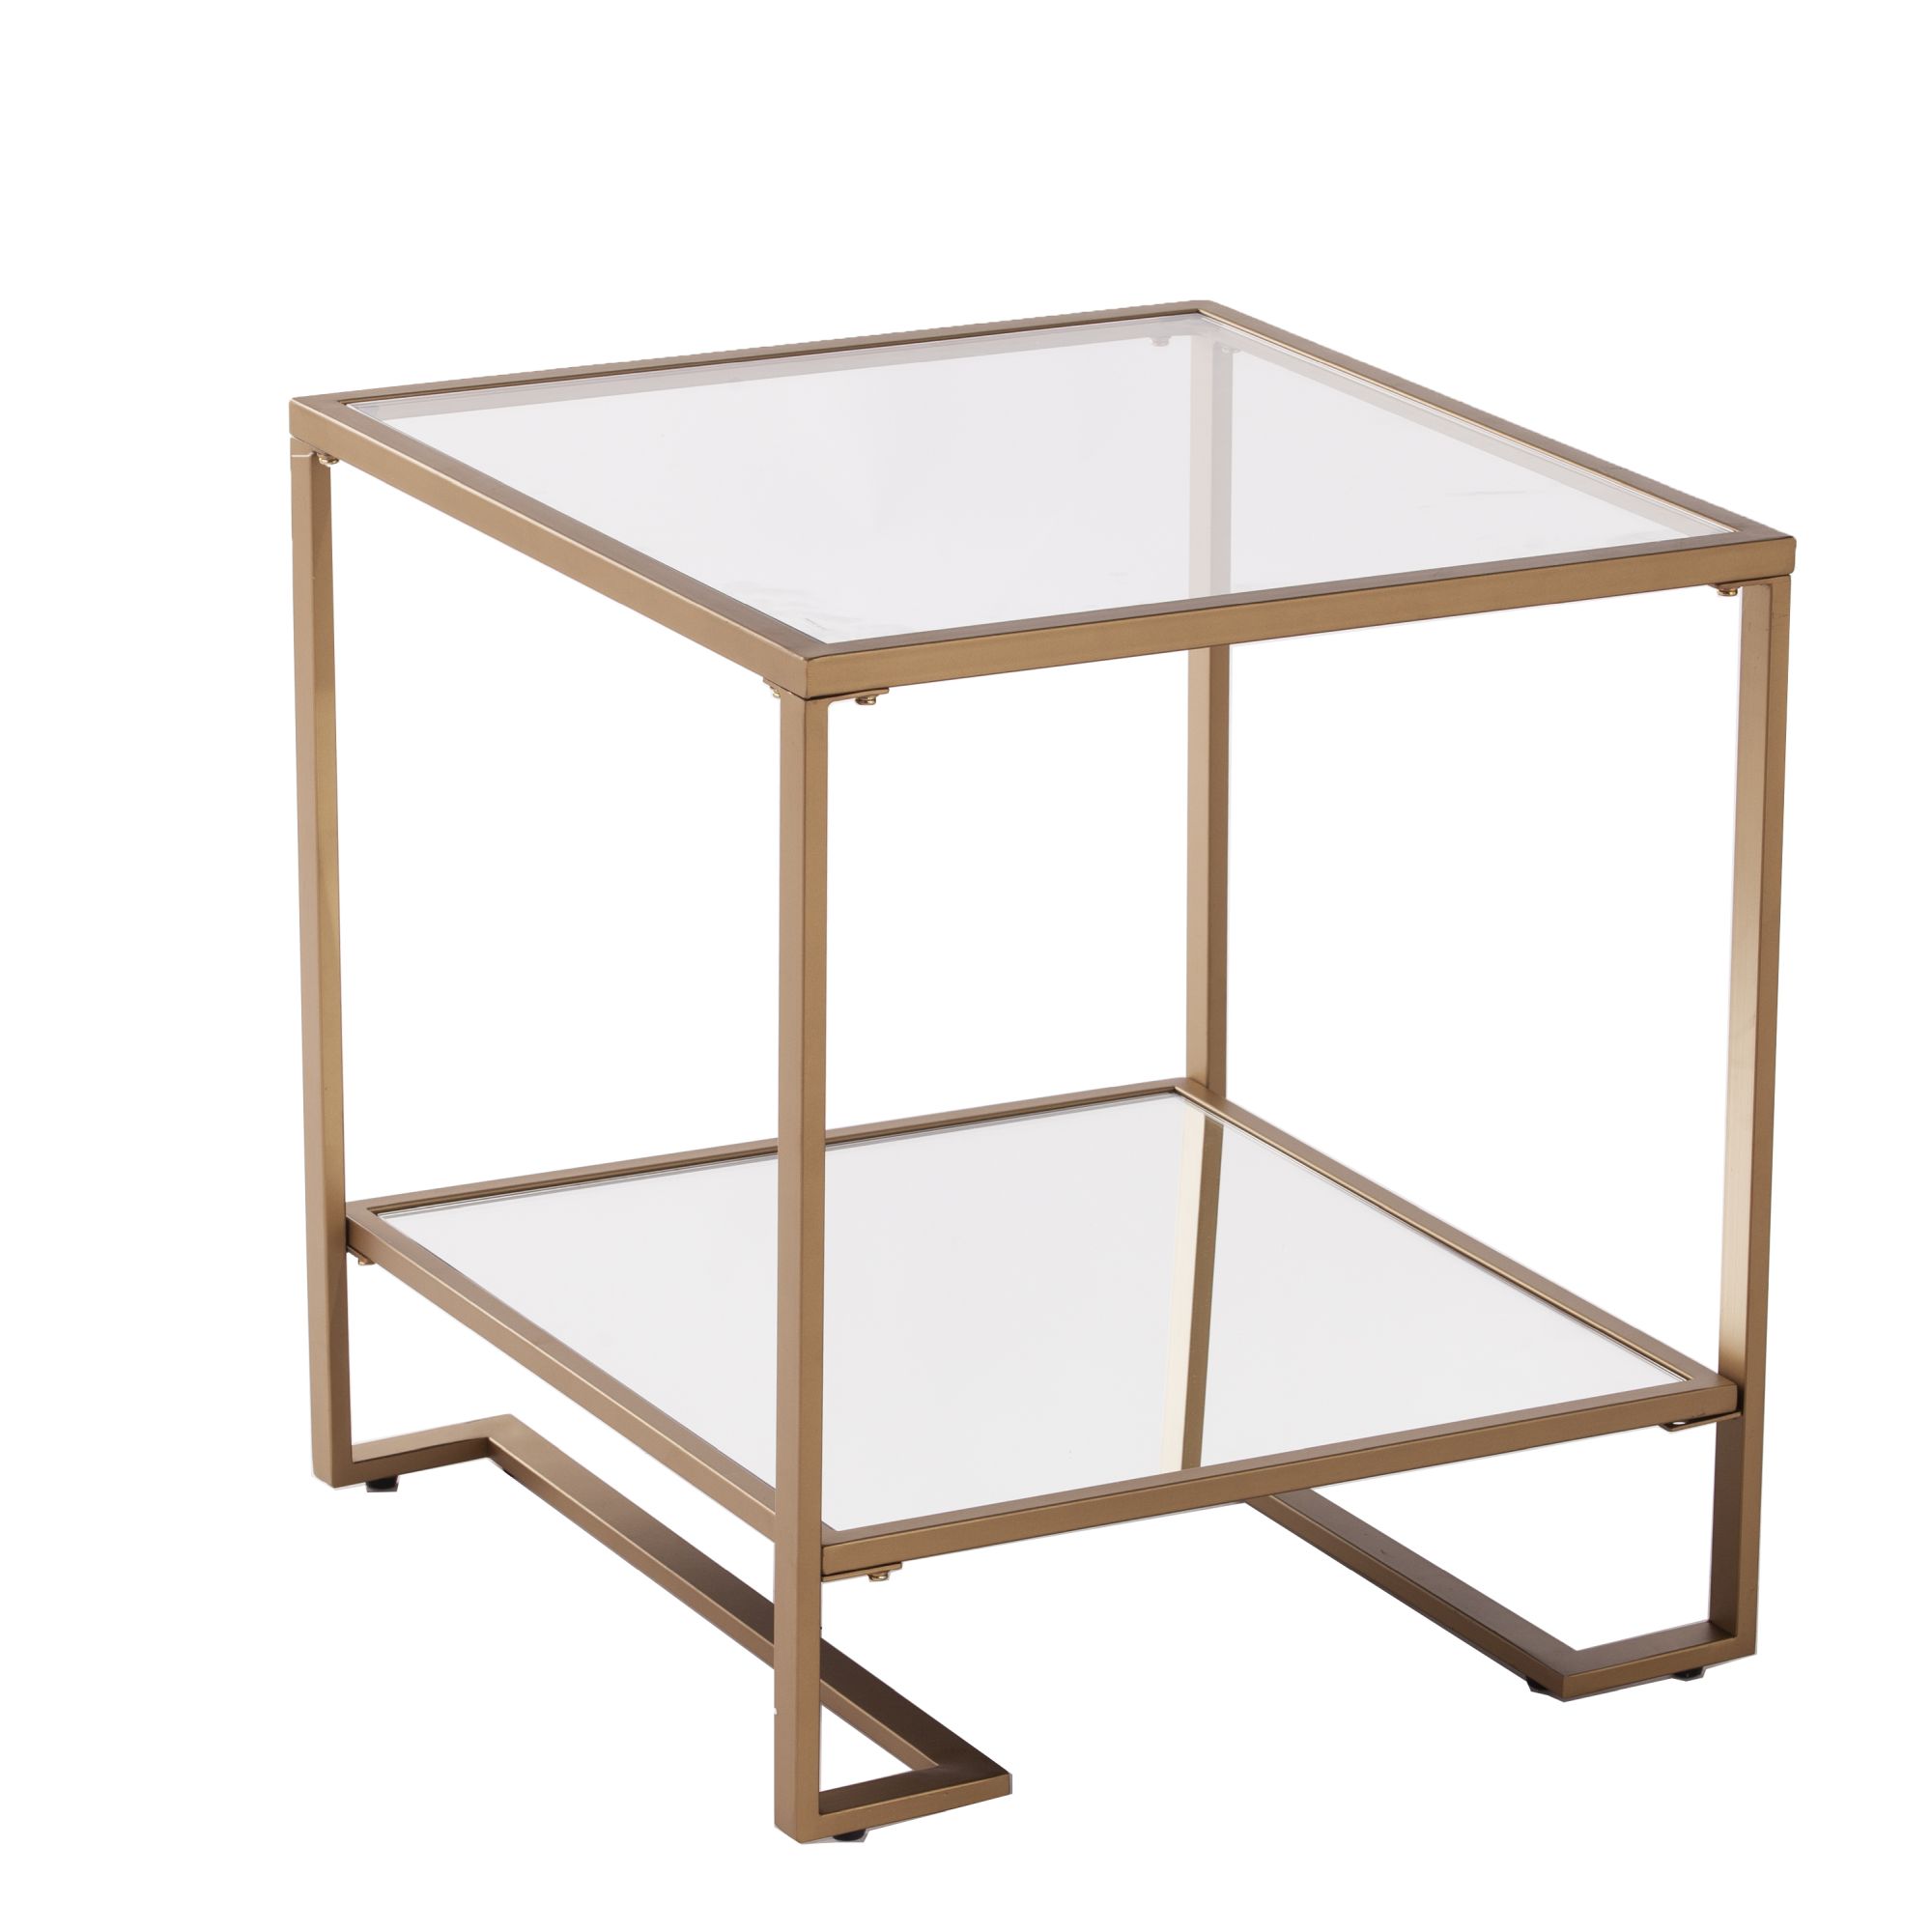 Horten Square Glass-Top End Table